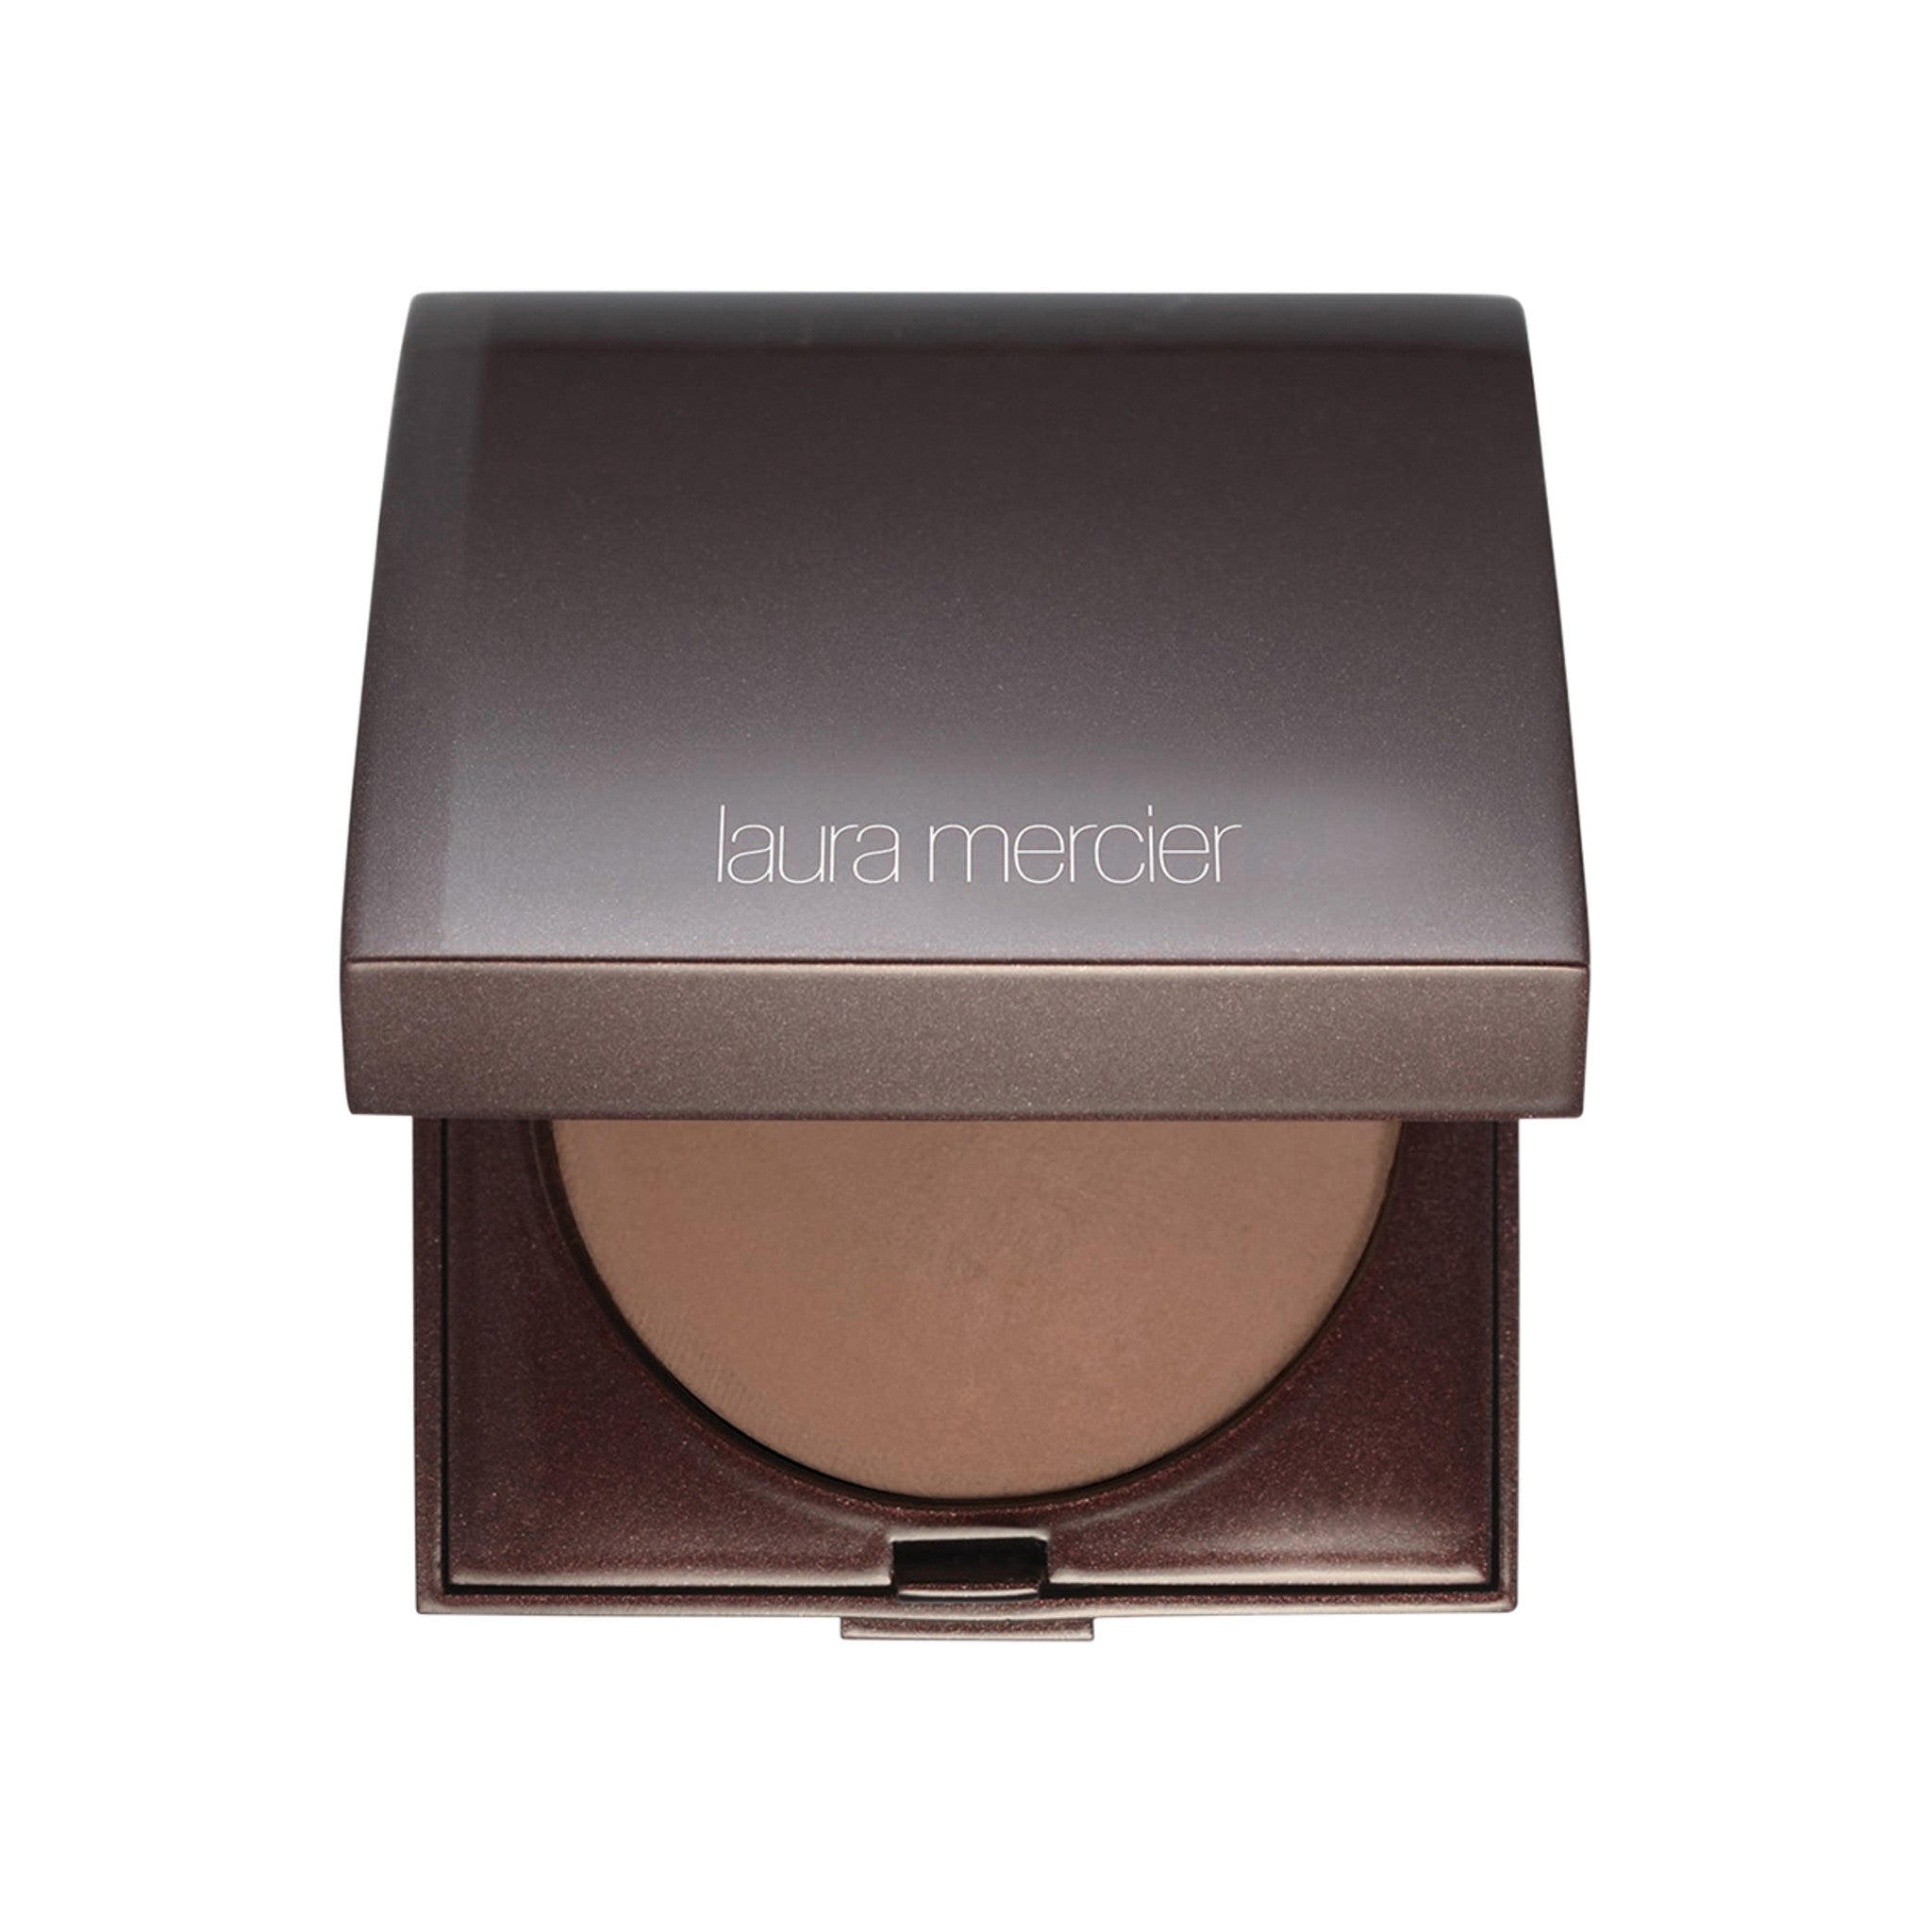 Laura Mercier Matte Radiance Baked Powder Color/Shade variant: Bronze 04 main image. This product is for deep complexions